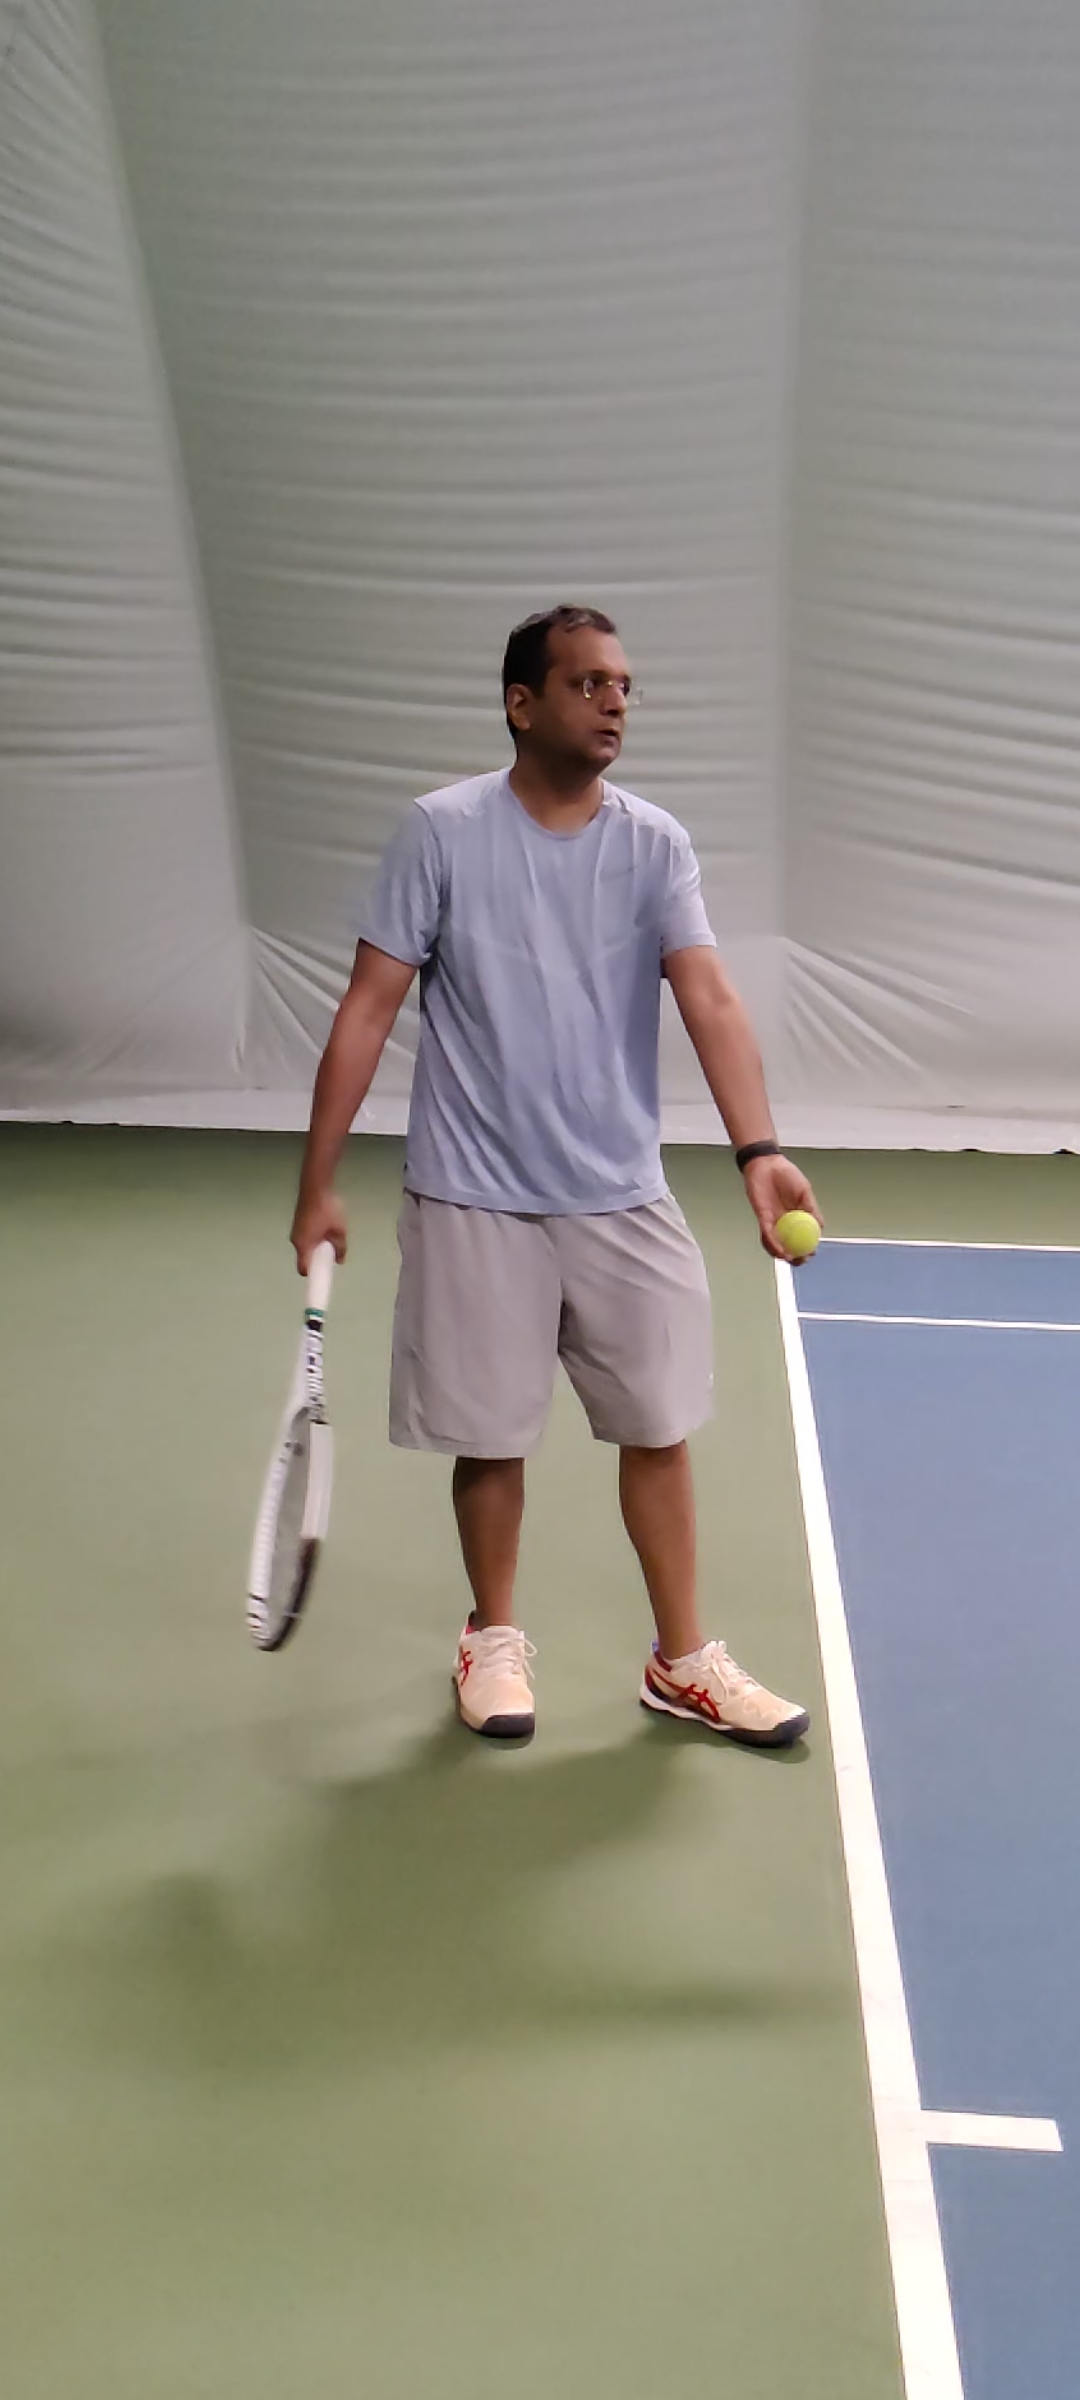 Adult Playing Tennis